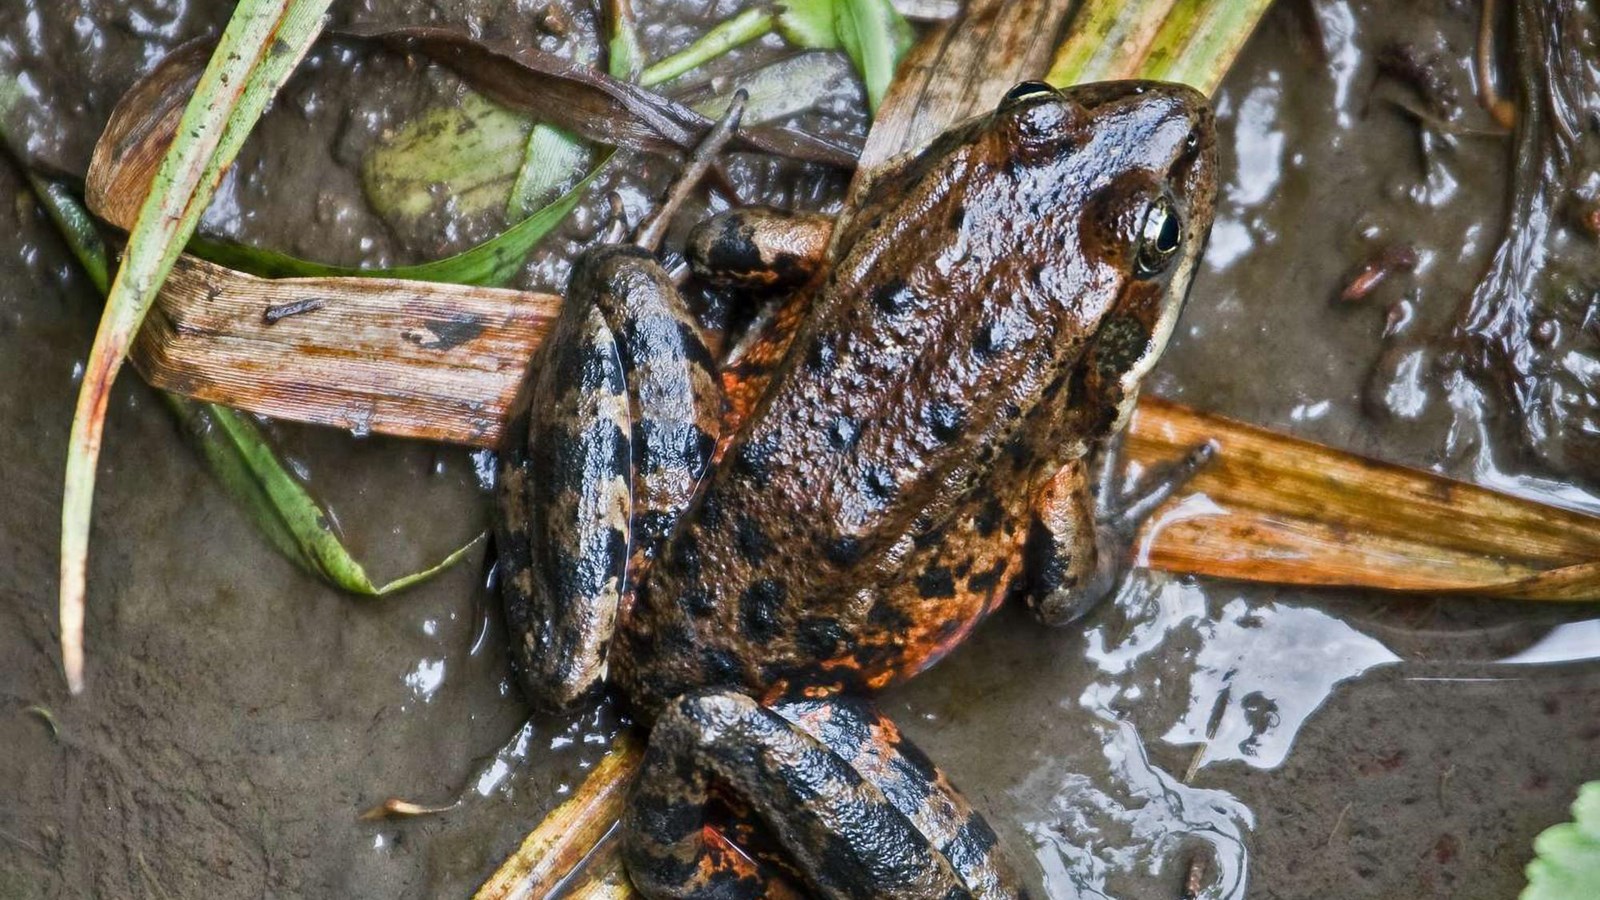  A California red-legged frog sits on a reed in the mud.